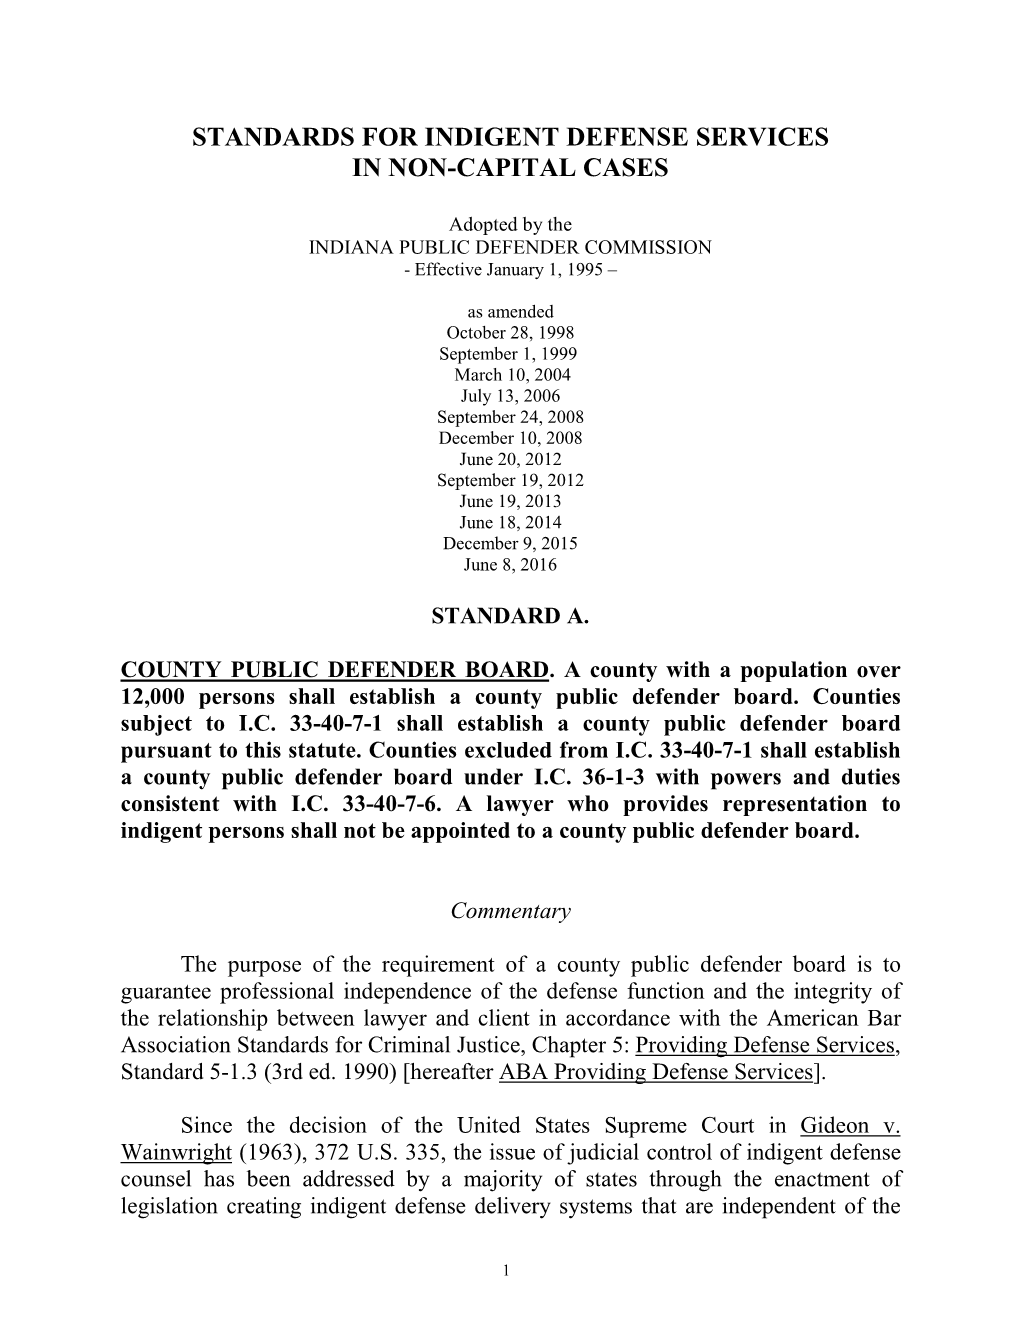 Standards for Indigent Defense Services in Non-Capital Cases